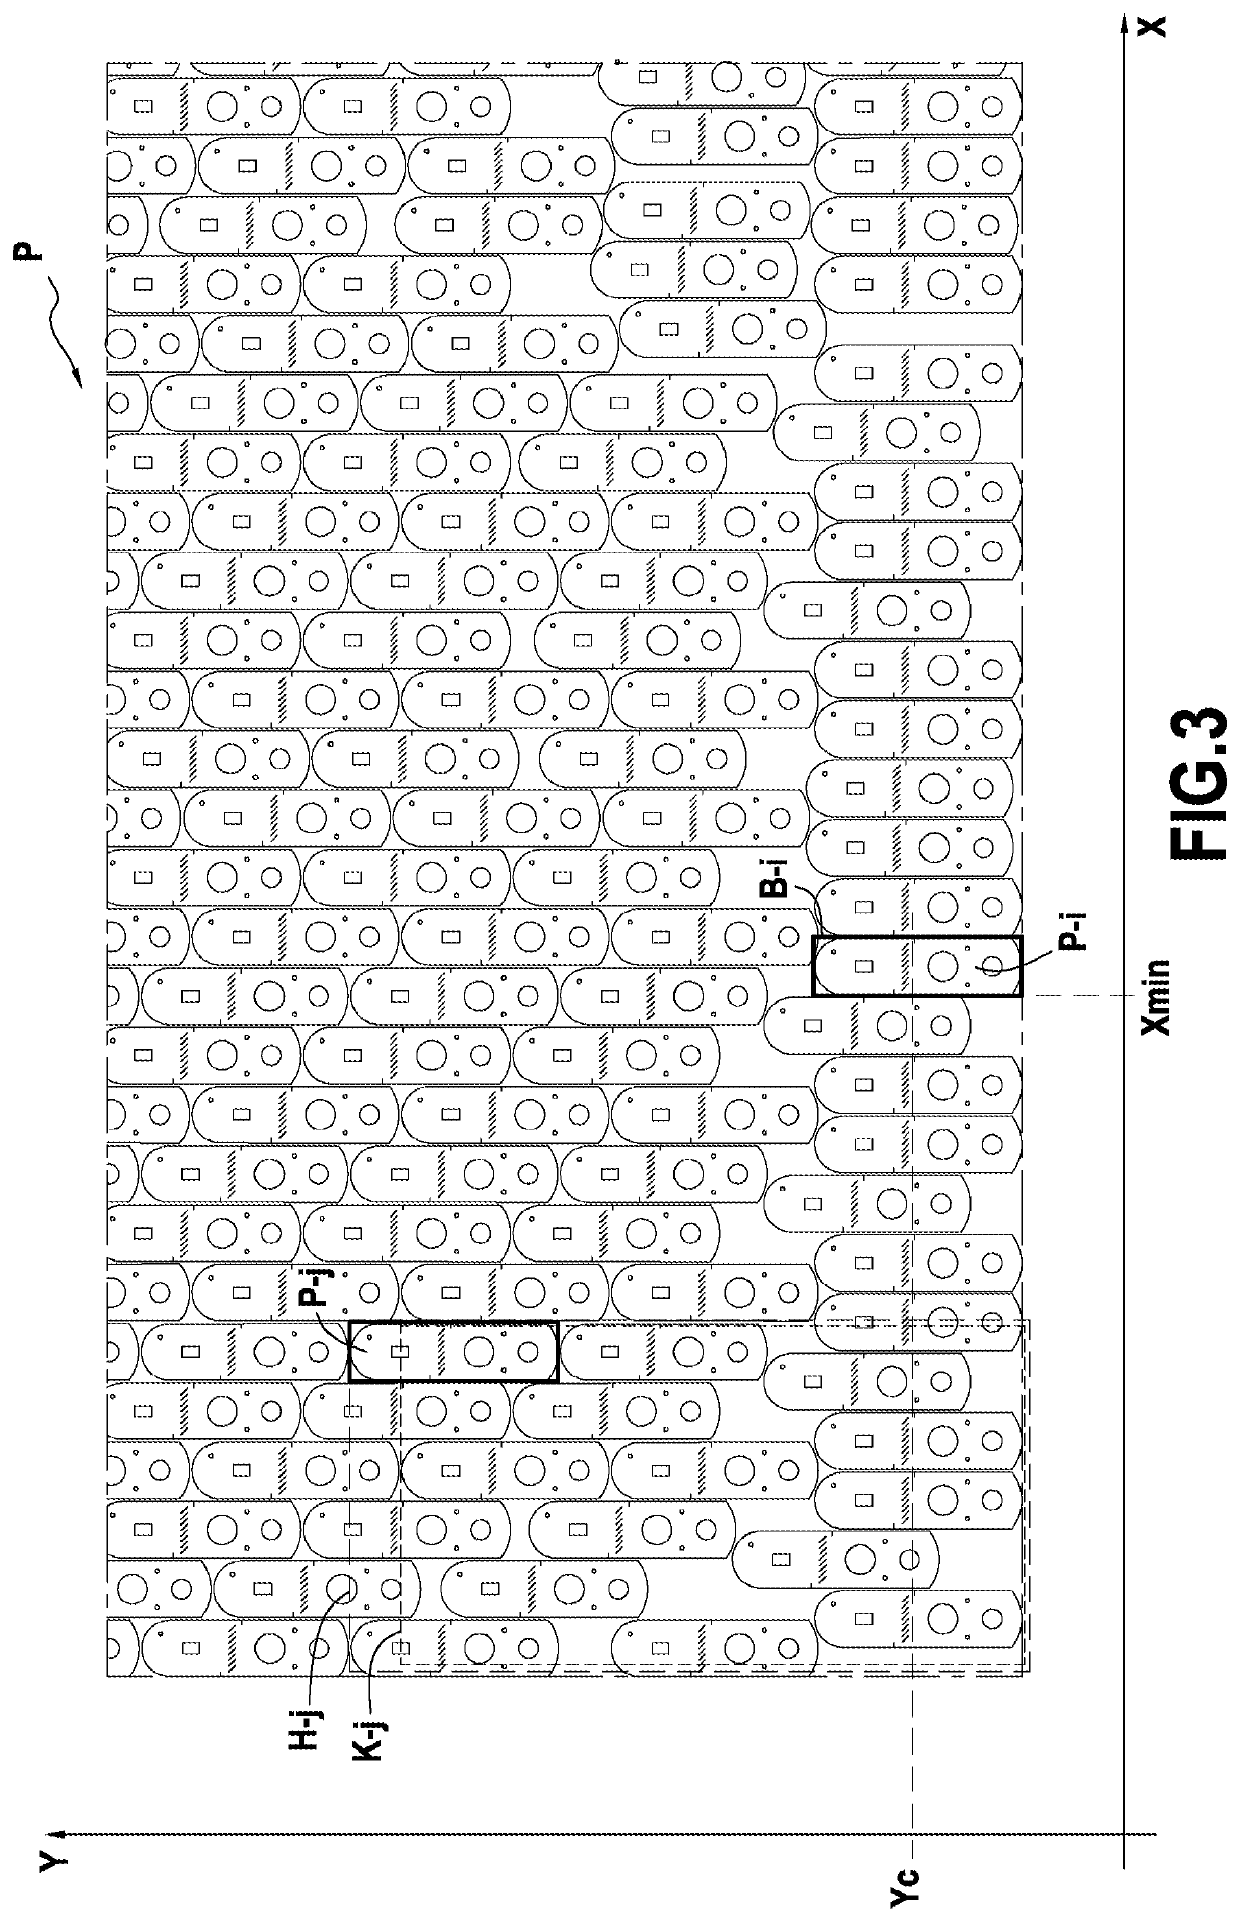 Method for partitioning a predetermined placement of parts intended to be cut in a flexible sheet material